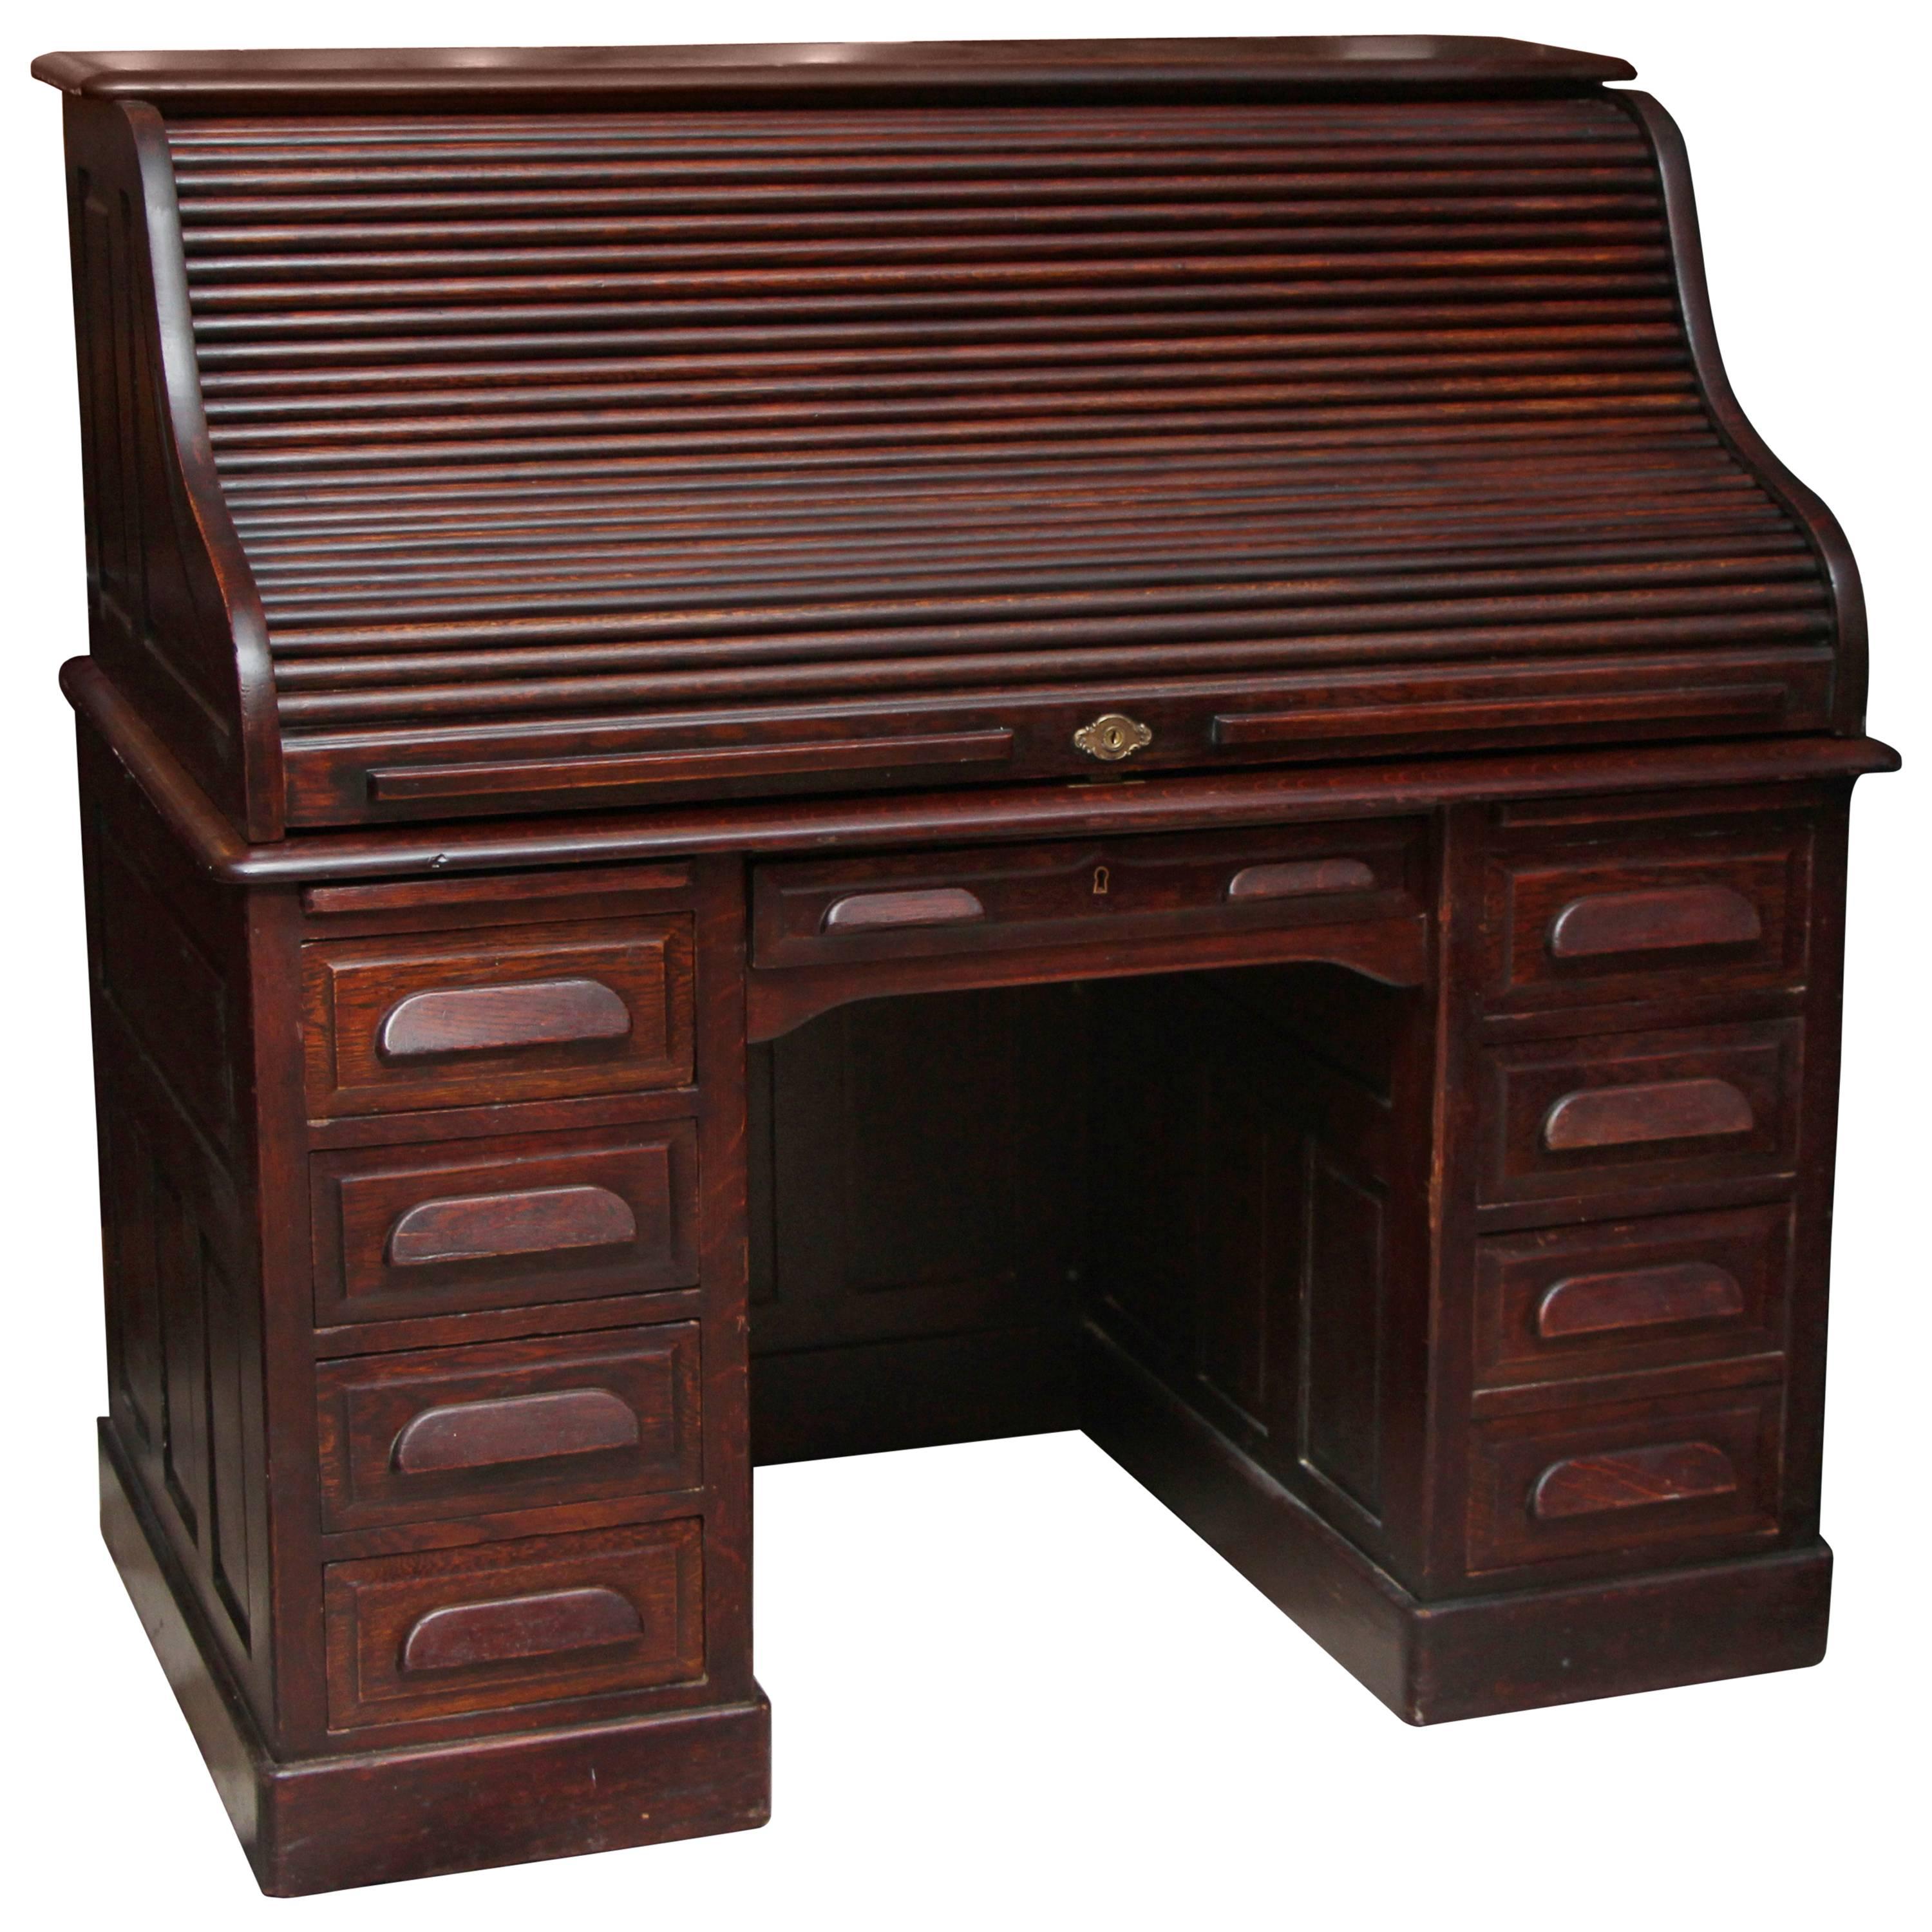 1910s Petite Antique Wooden Serpentine Roll Top Desk with Nine Drawers